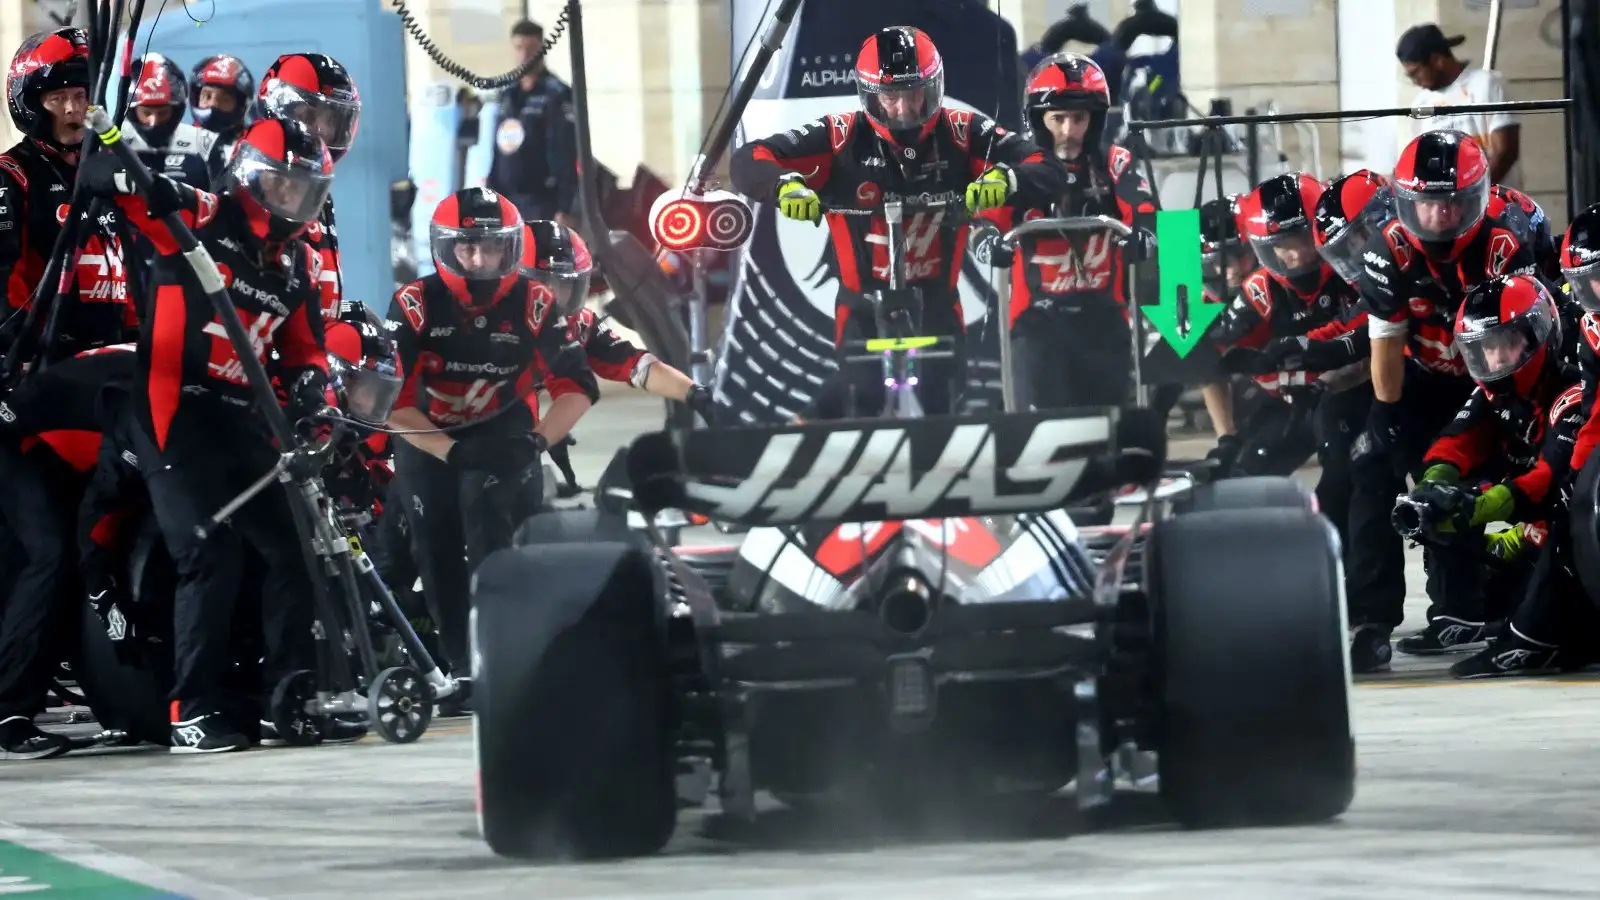 Haas driver Nico Hulkenberg pulls into the pits for a pit stop.